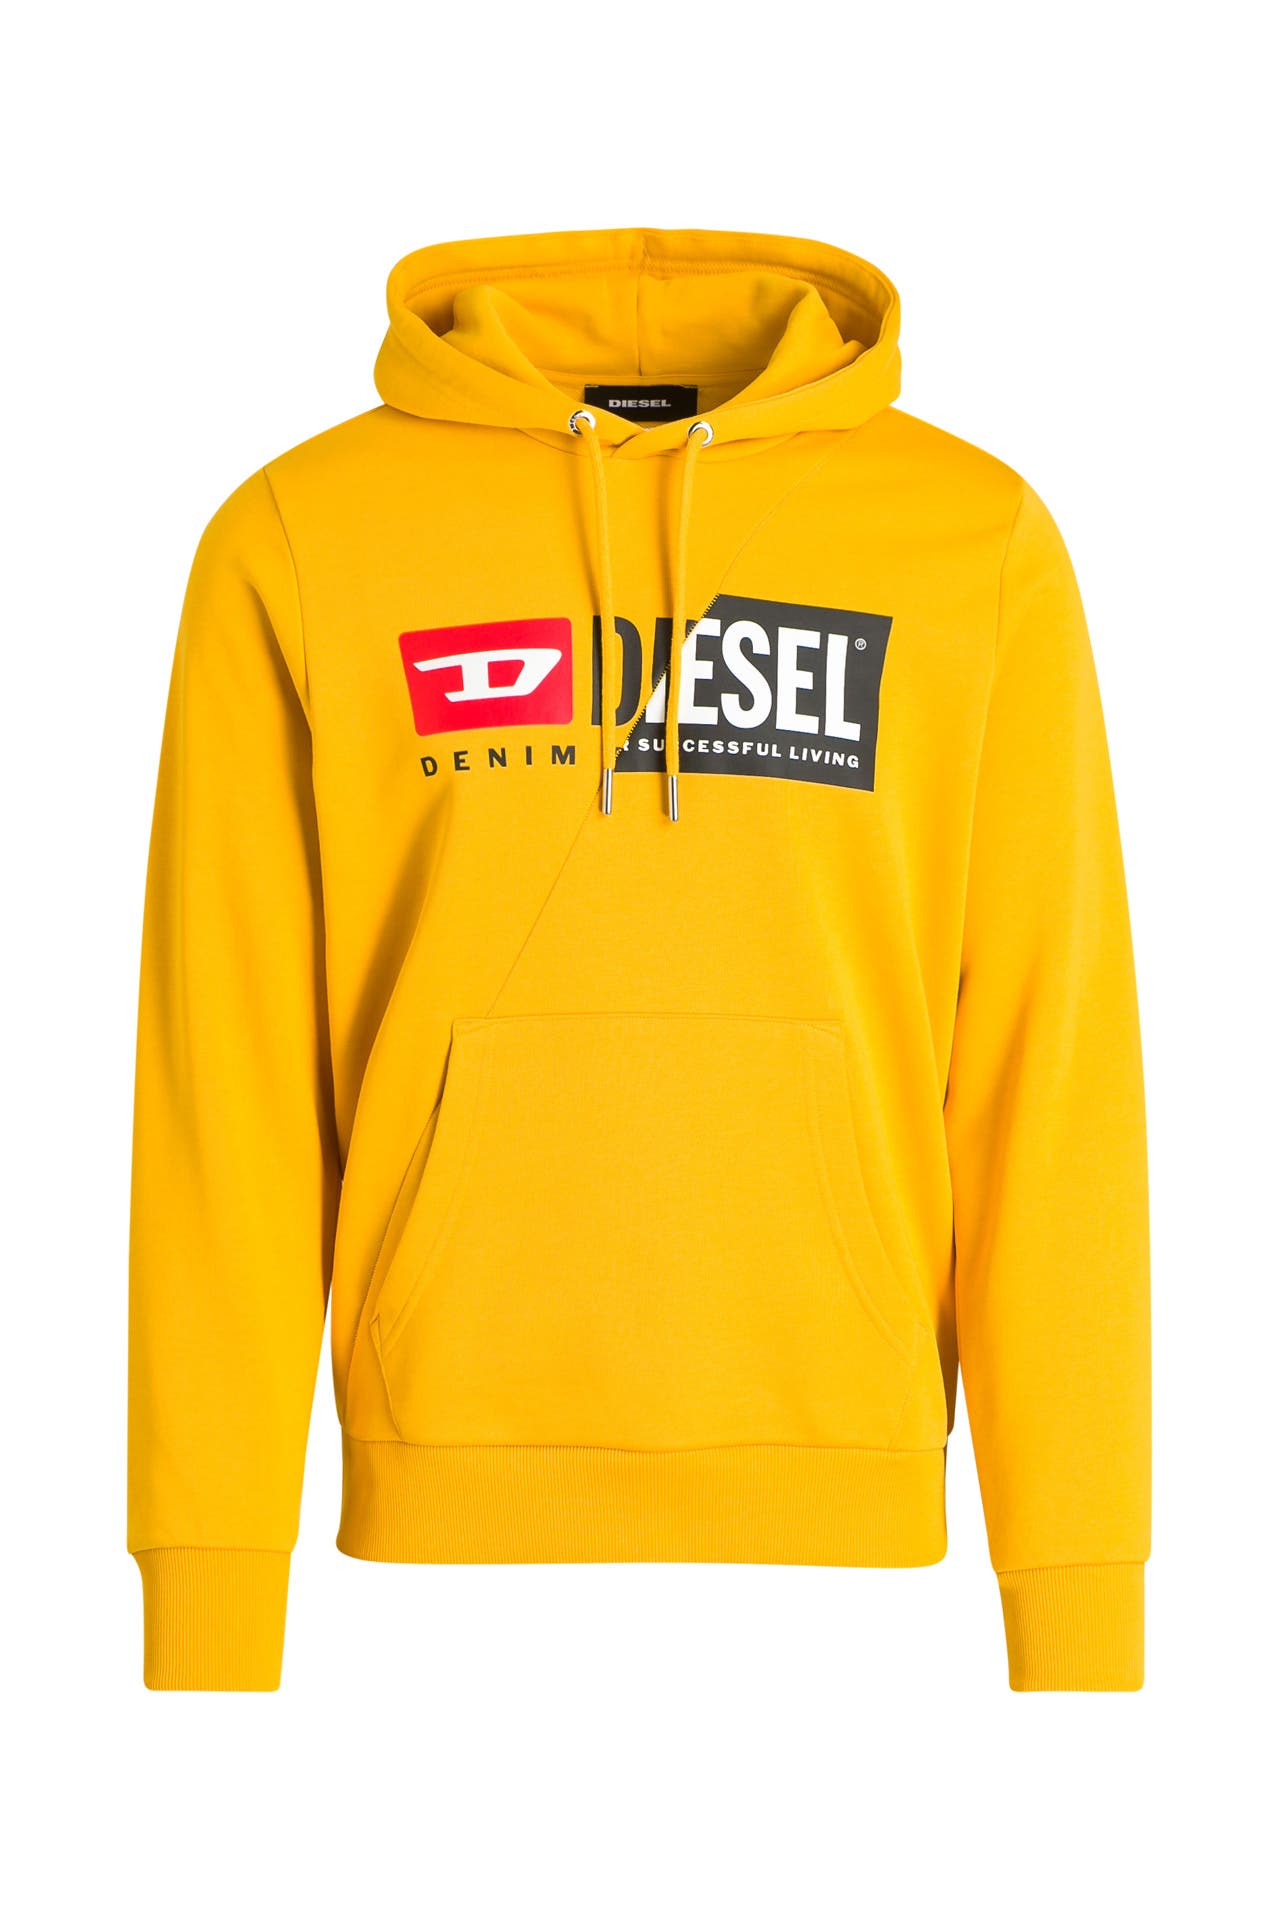 Diesel OUTLET in Germany • Sale up to 70%* off | Outletcity Metzingen